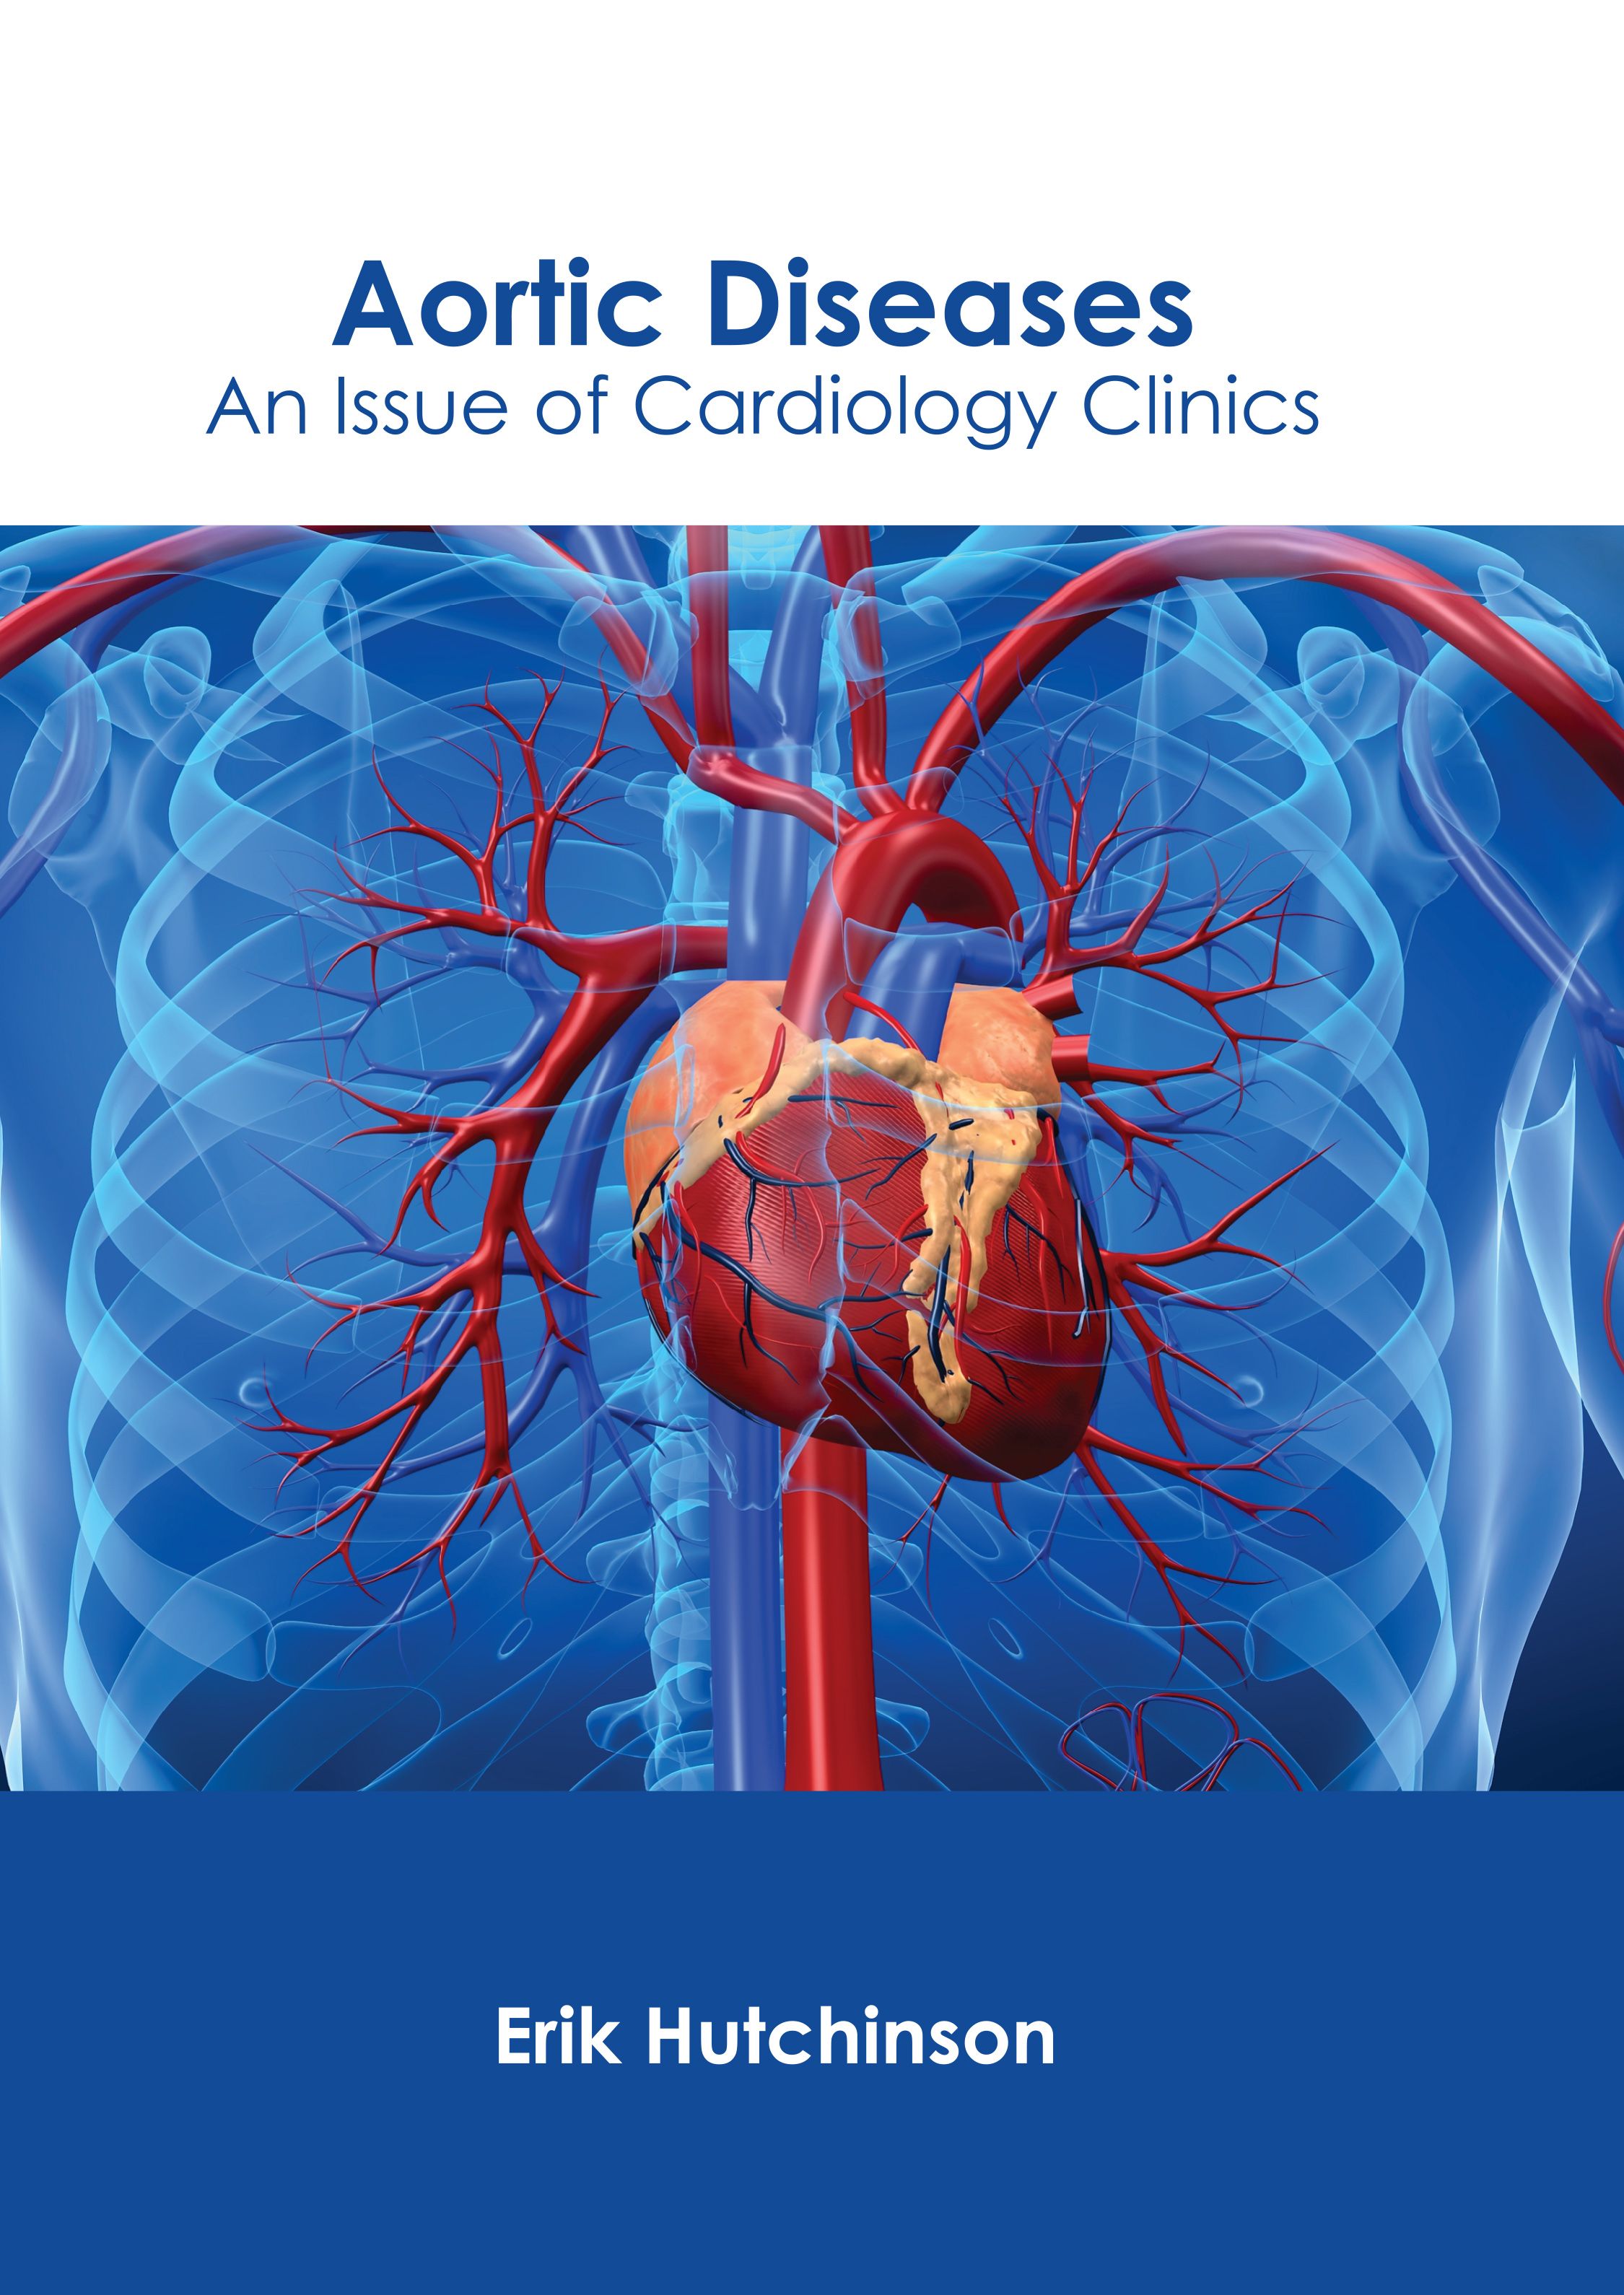 AORTIC DISEASES: AN ISSUE OF CARDIOLOGY CLINICS